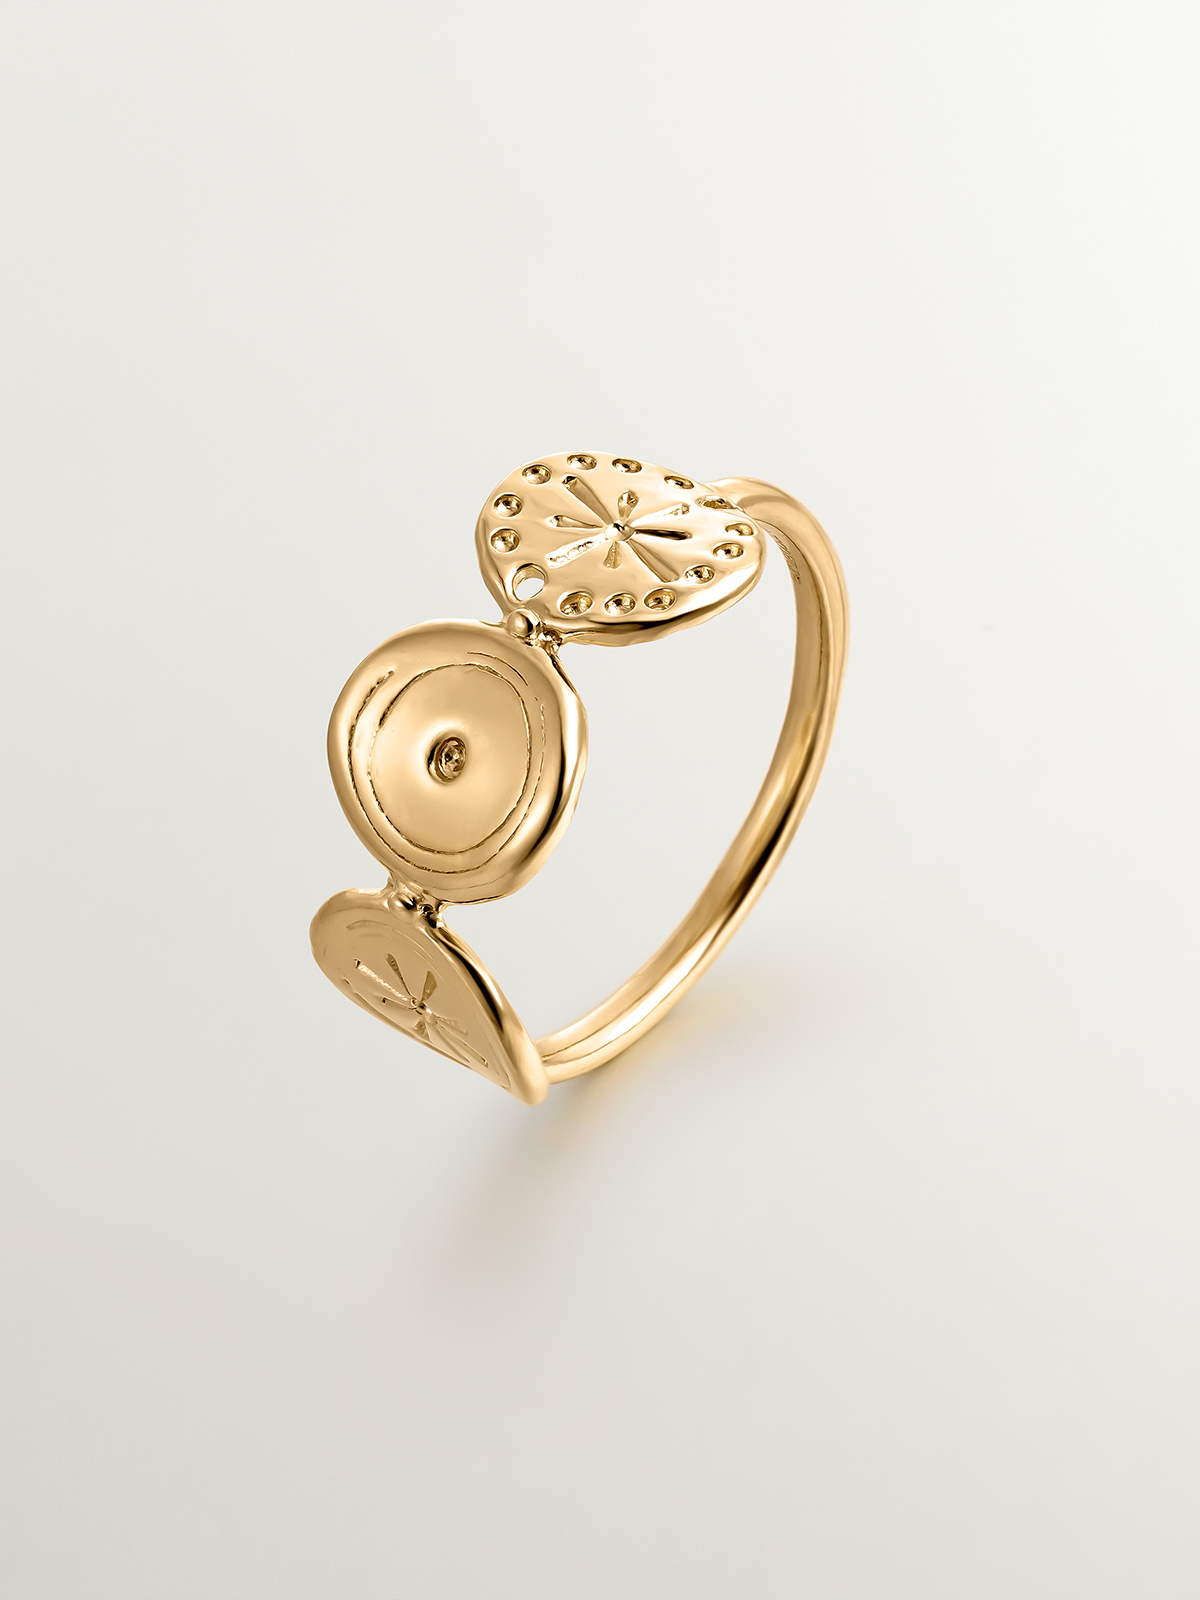 925 Silver ring bathed in 18K yellow gold with ethnic motifs.